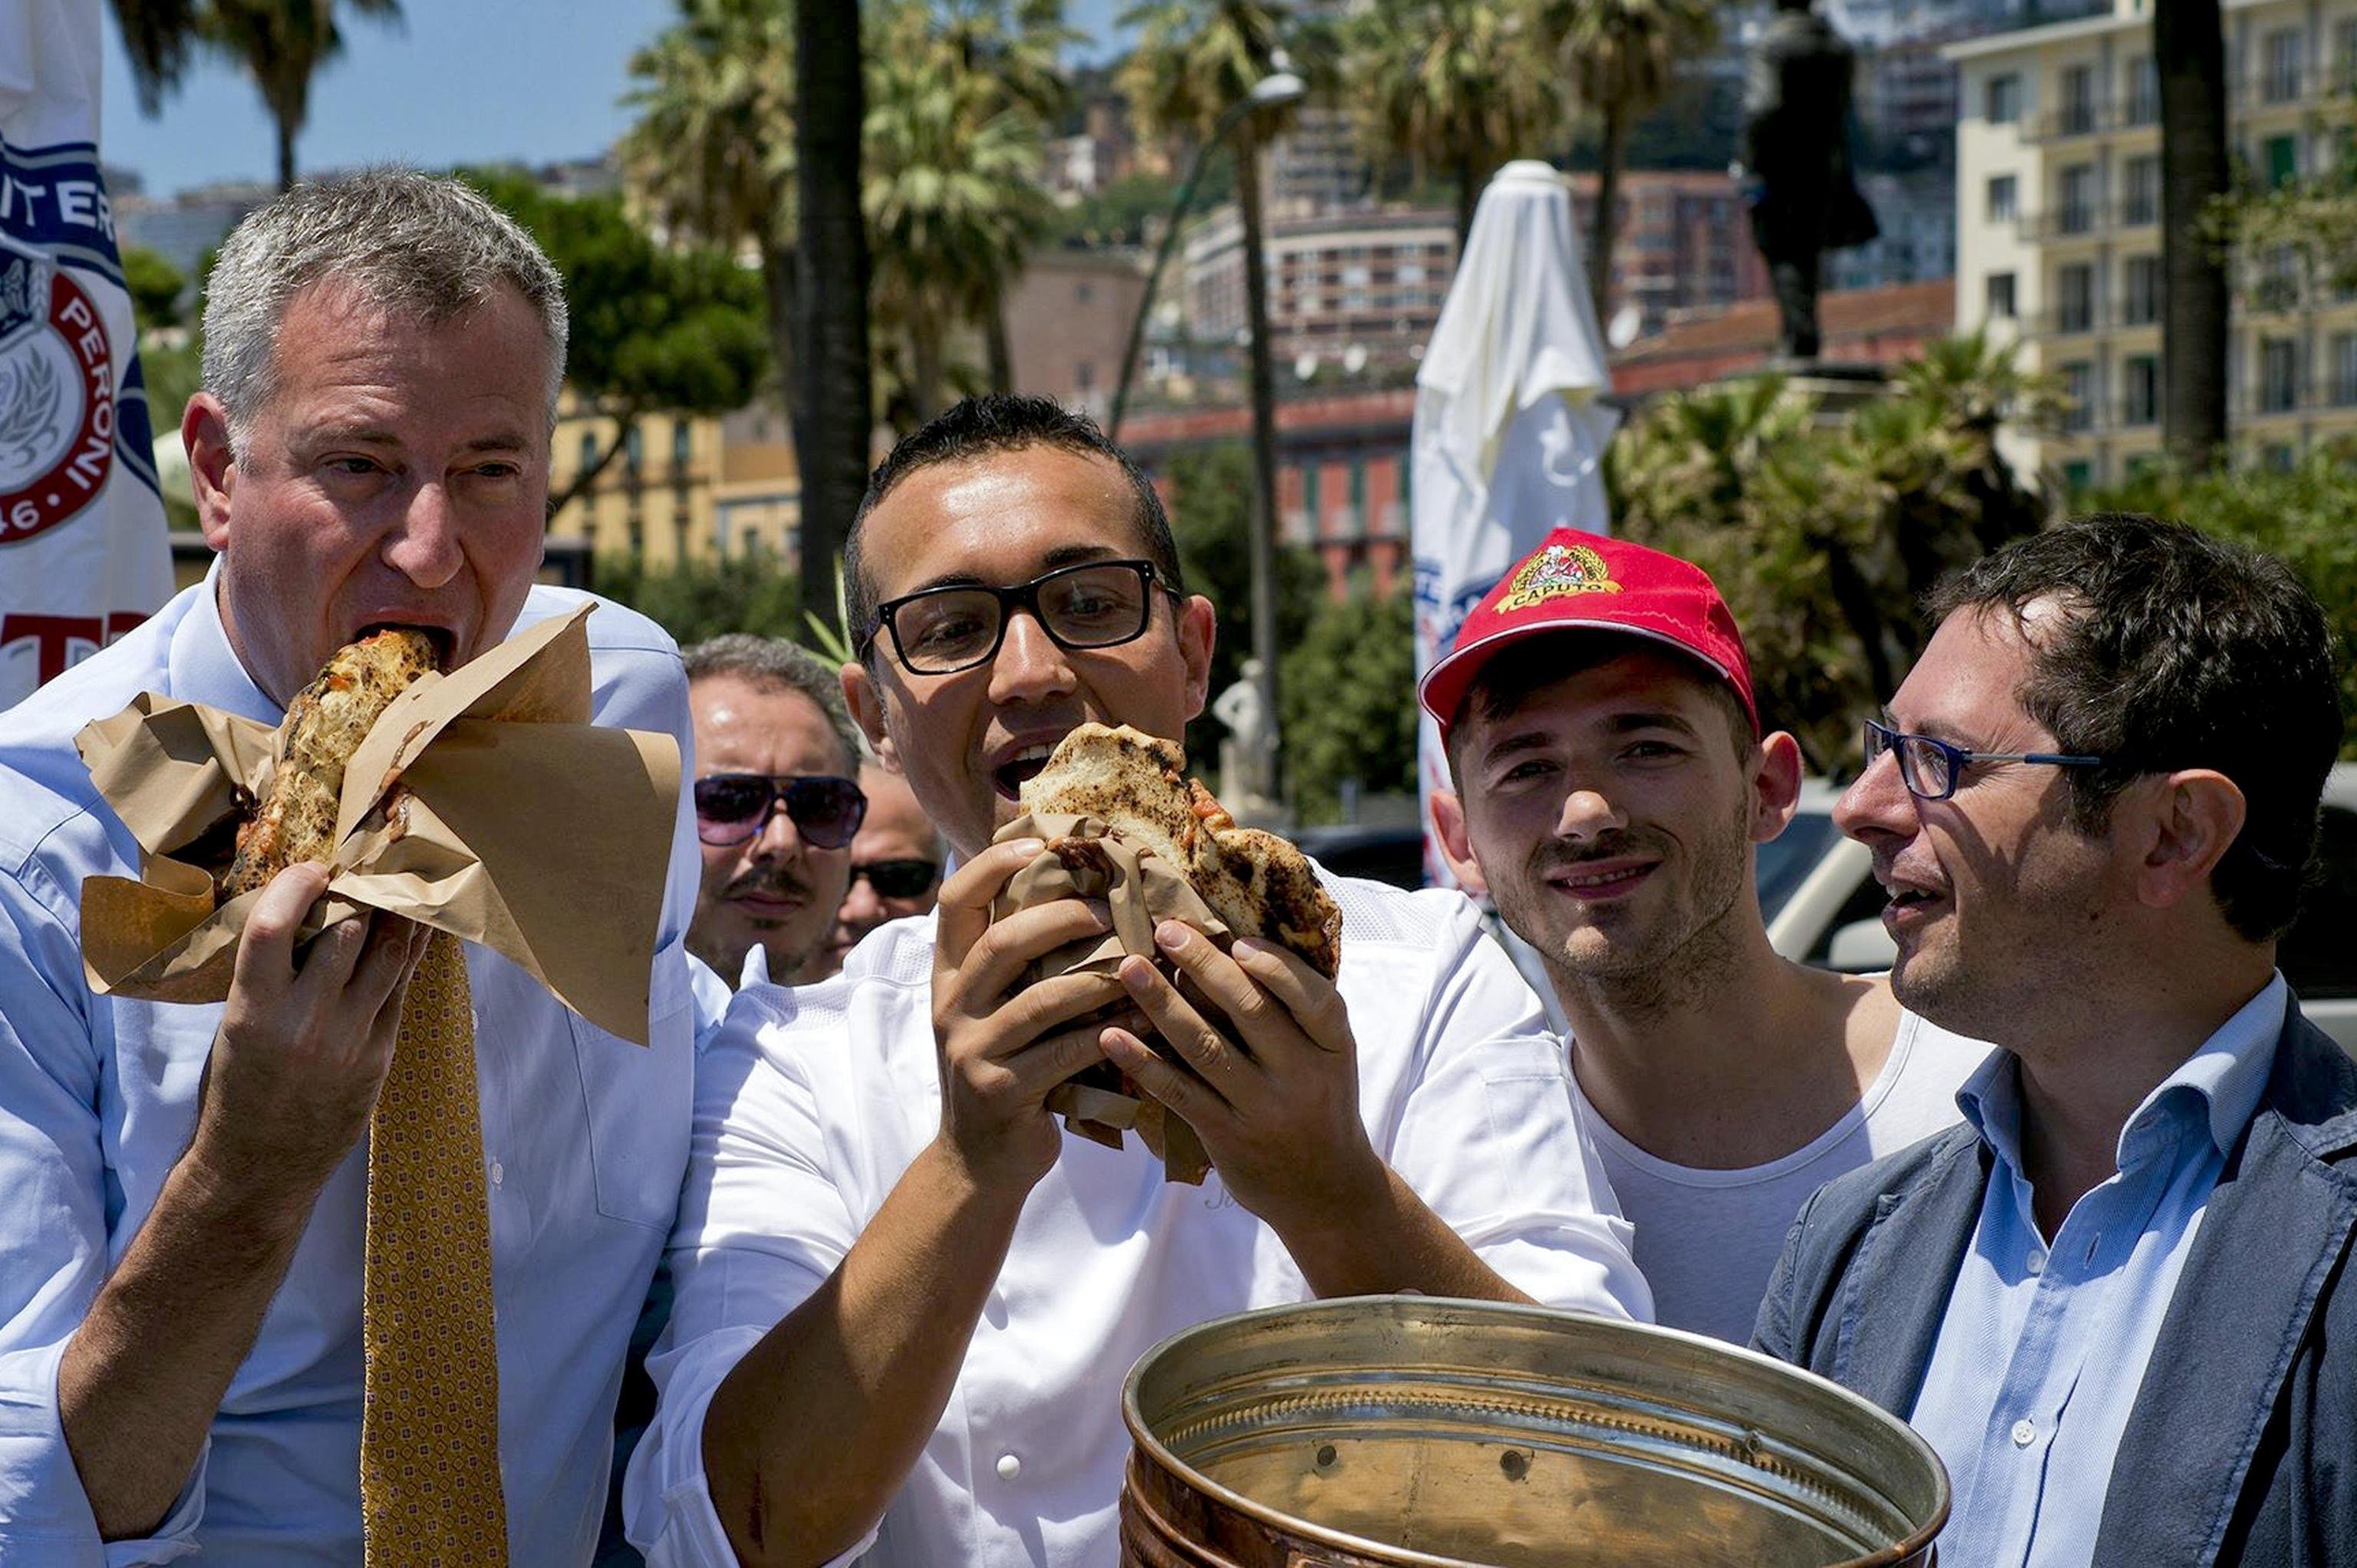 New York mayor Bill de Blasio (L) eats a pizza made by Napoli's pizza chef Gino Sorbillo (2nd from L) in Naples, Italy on July 23, 2014..